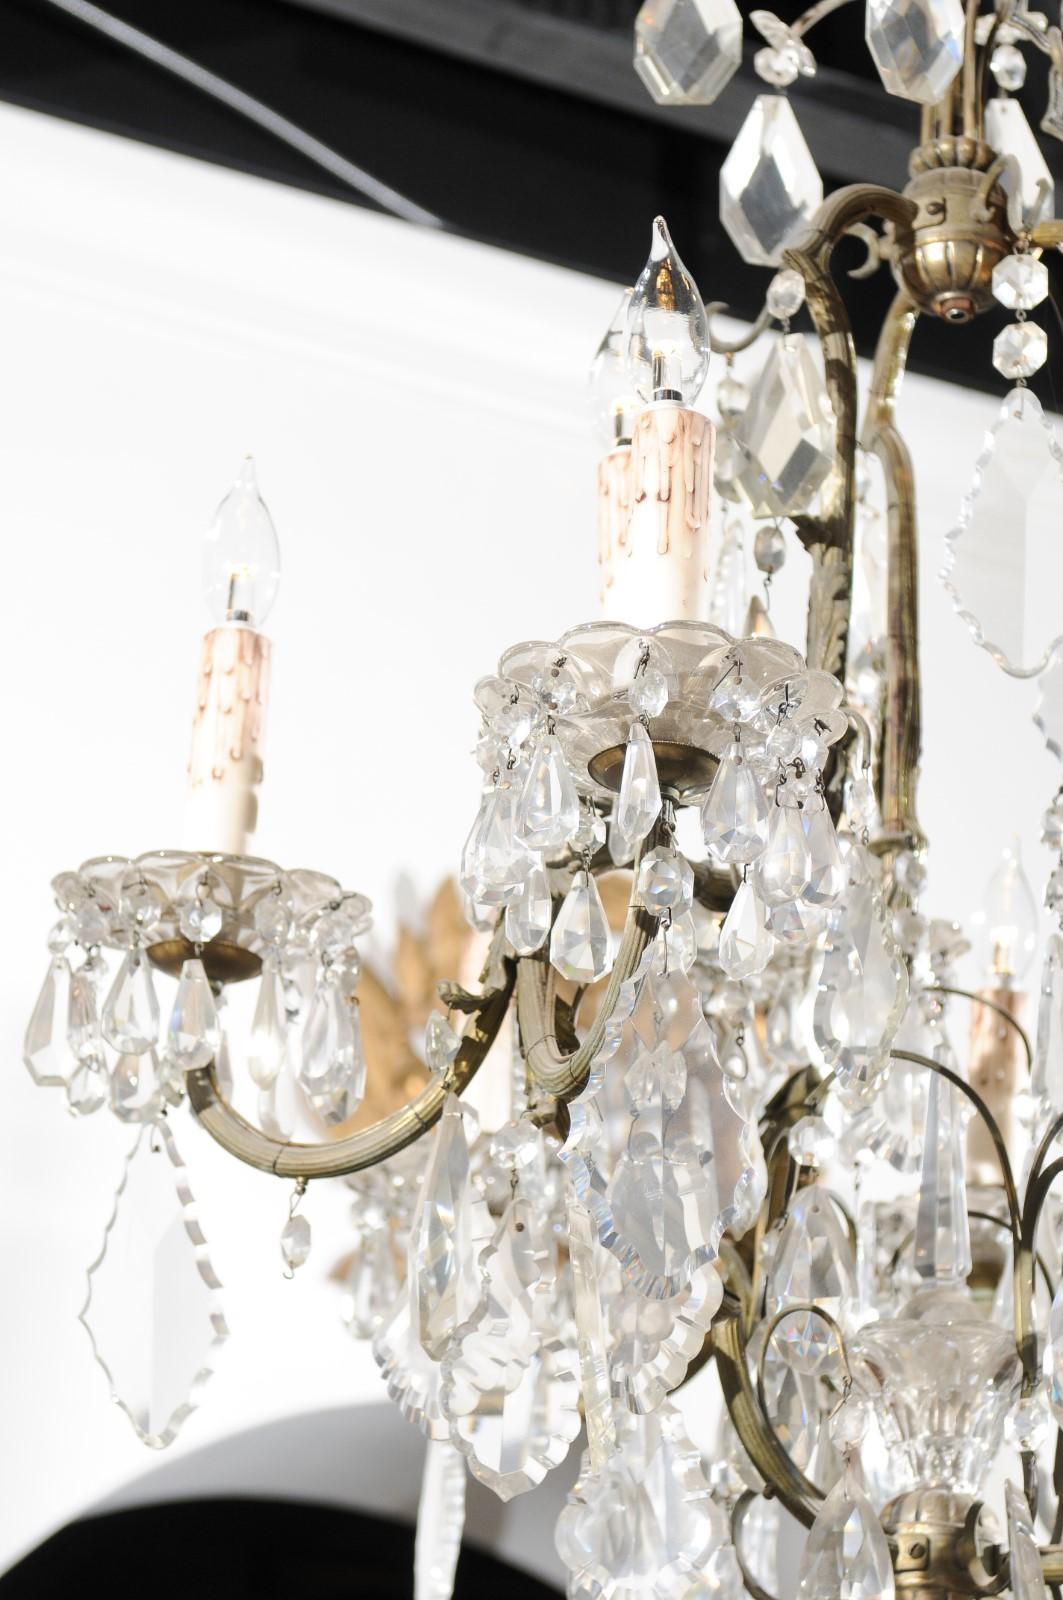 French Eight-Light Crystal Chandelier with Iron Armature from the 19th Century For Sale 4